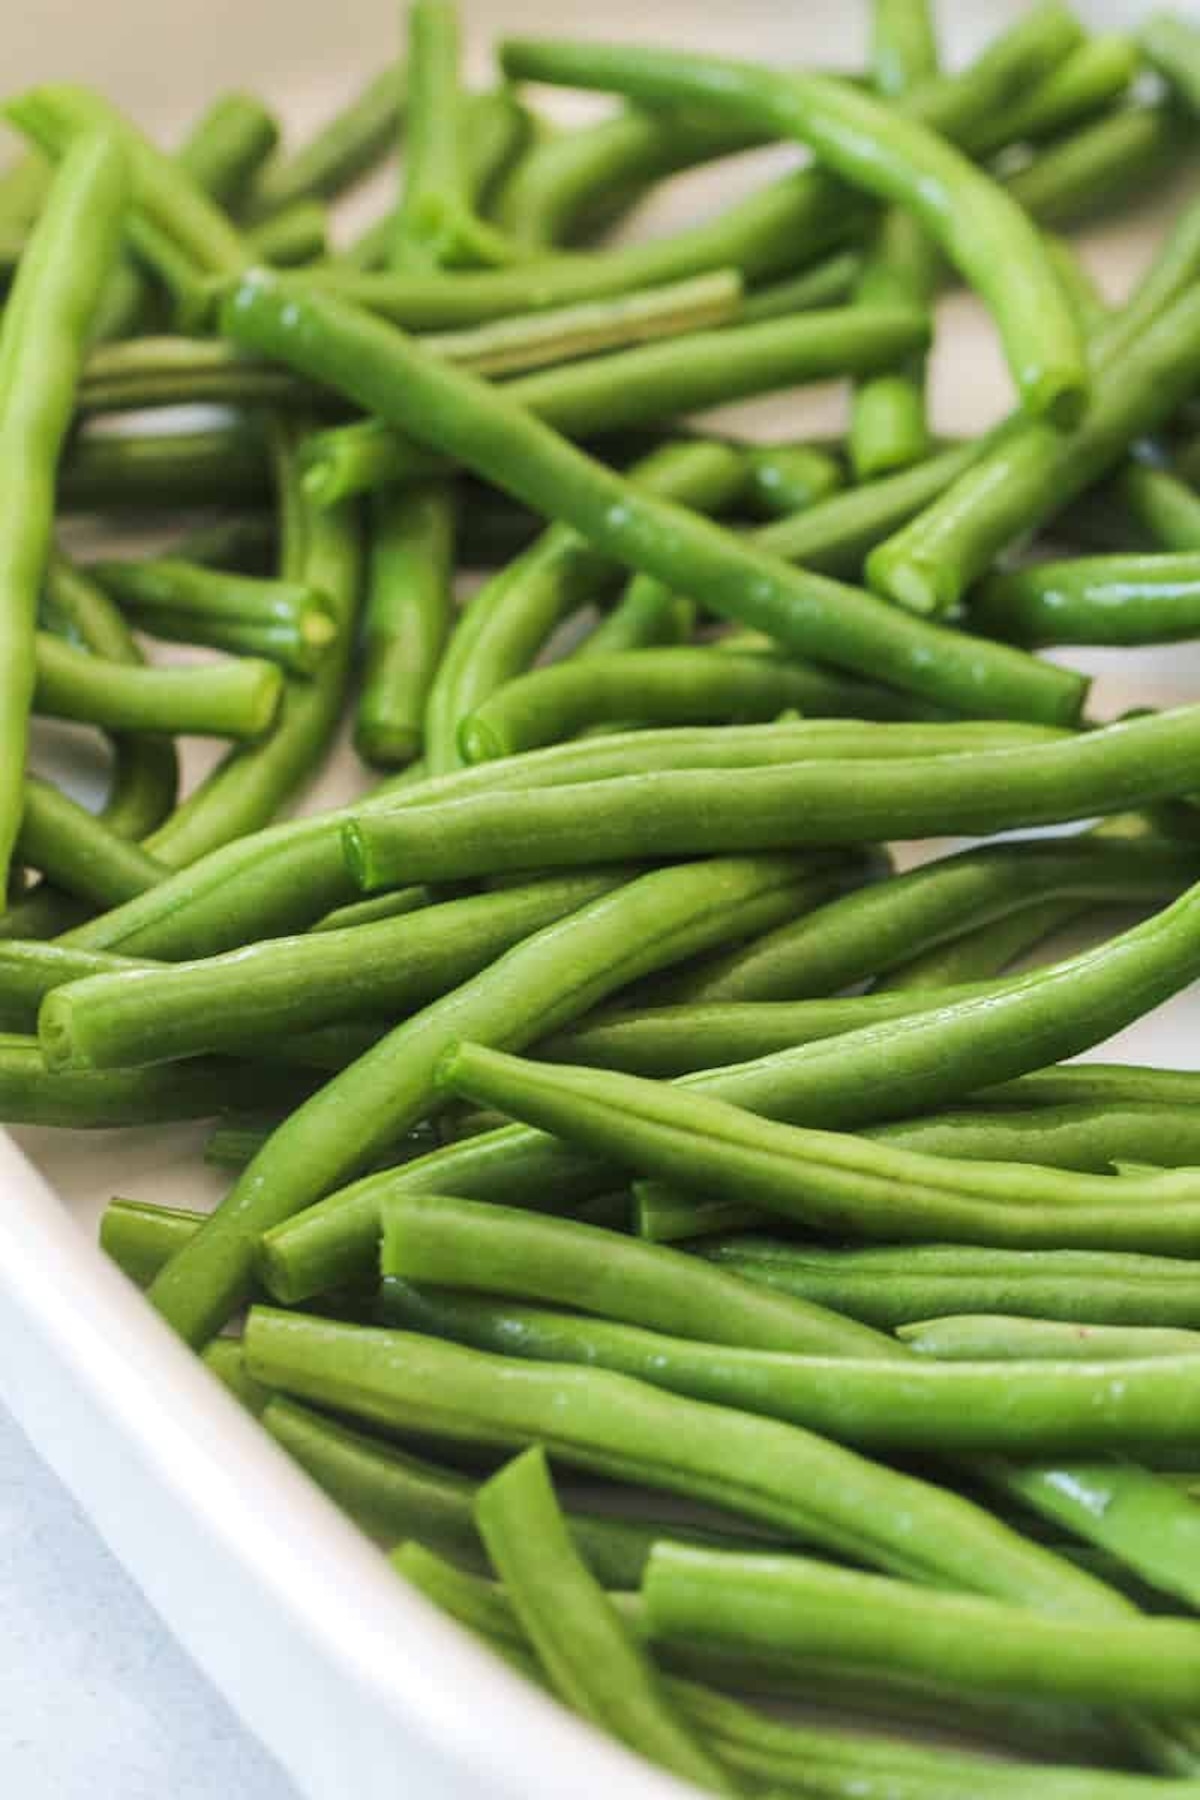 A close-up view of fresh green beans piled together in a white dish.